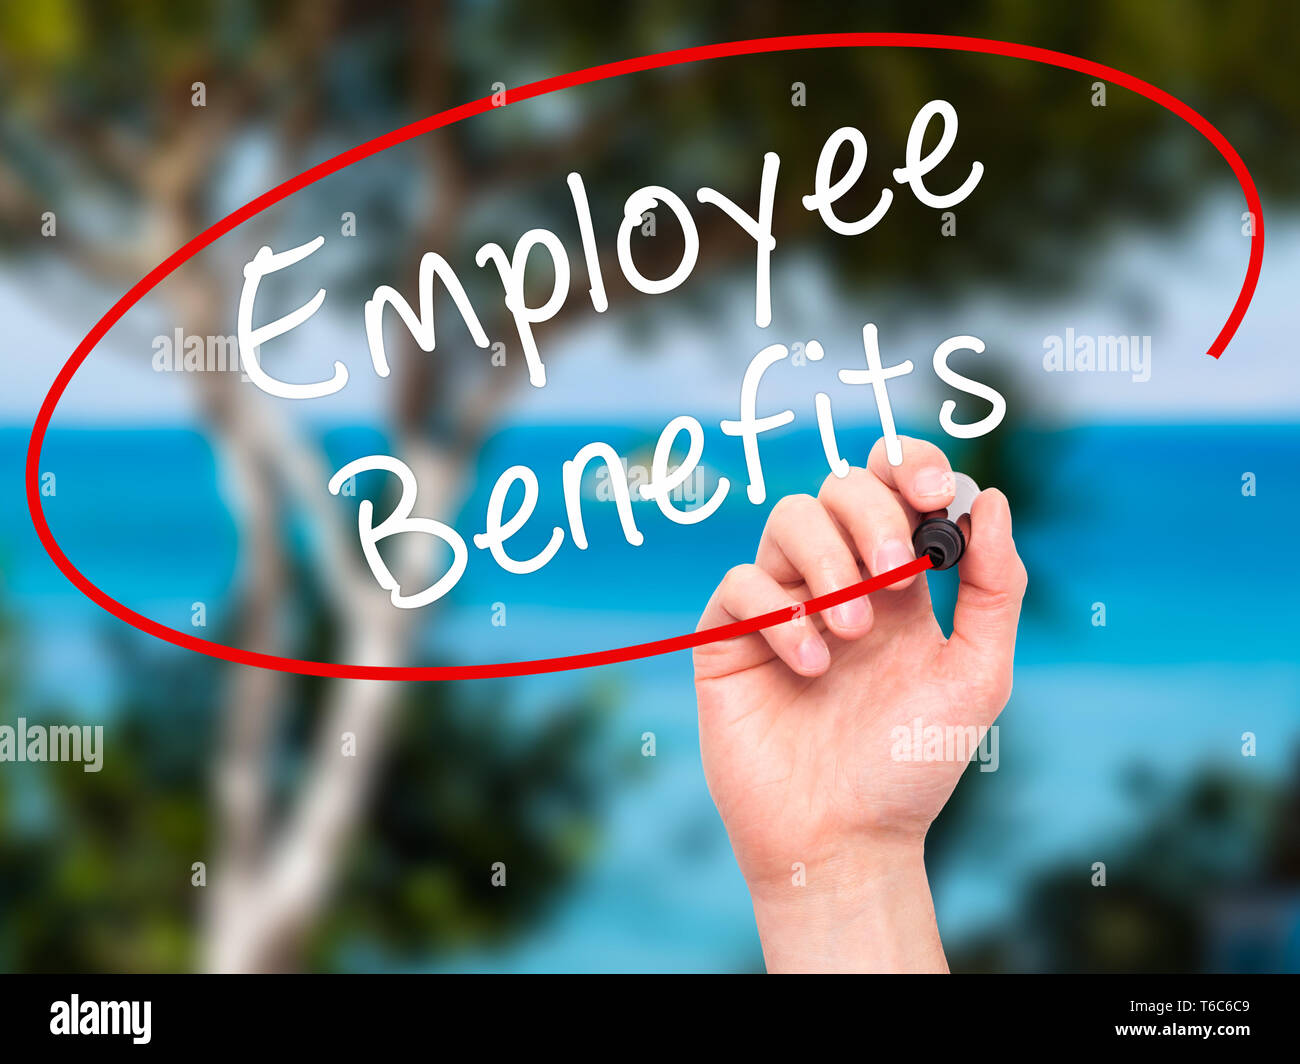 Benefit shop hi-res stock photography and images - Alamy